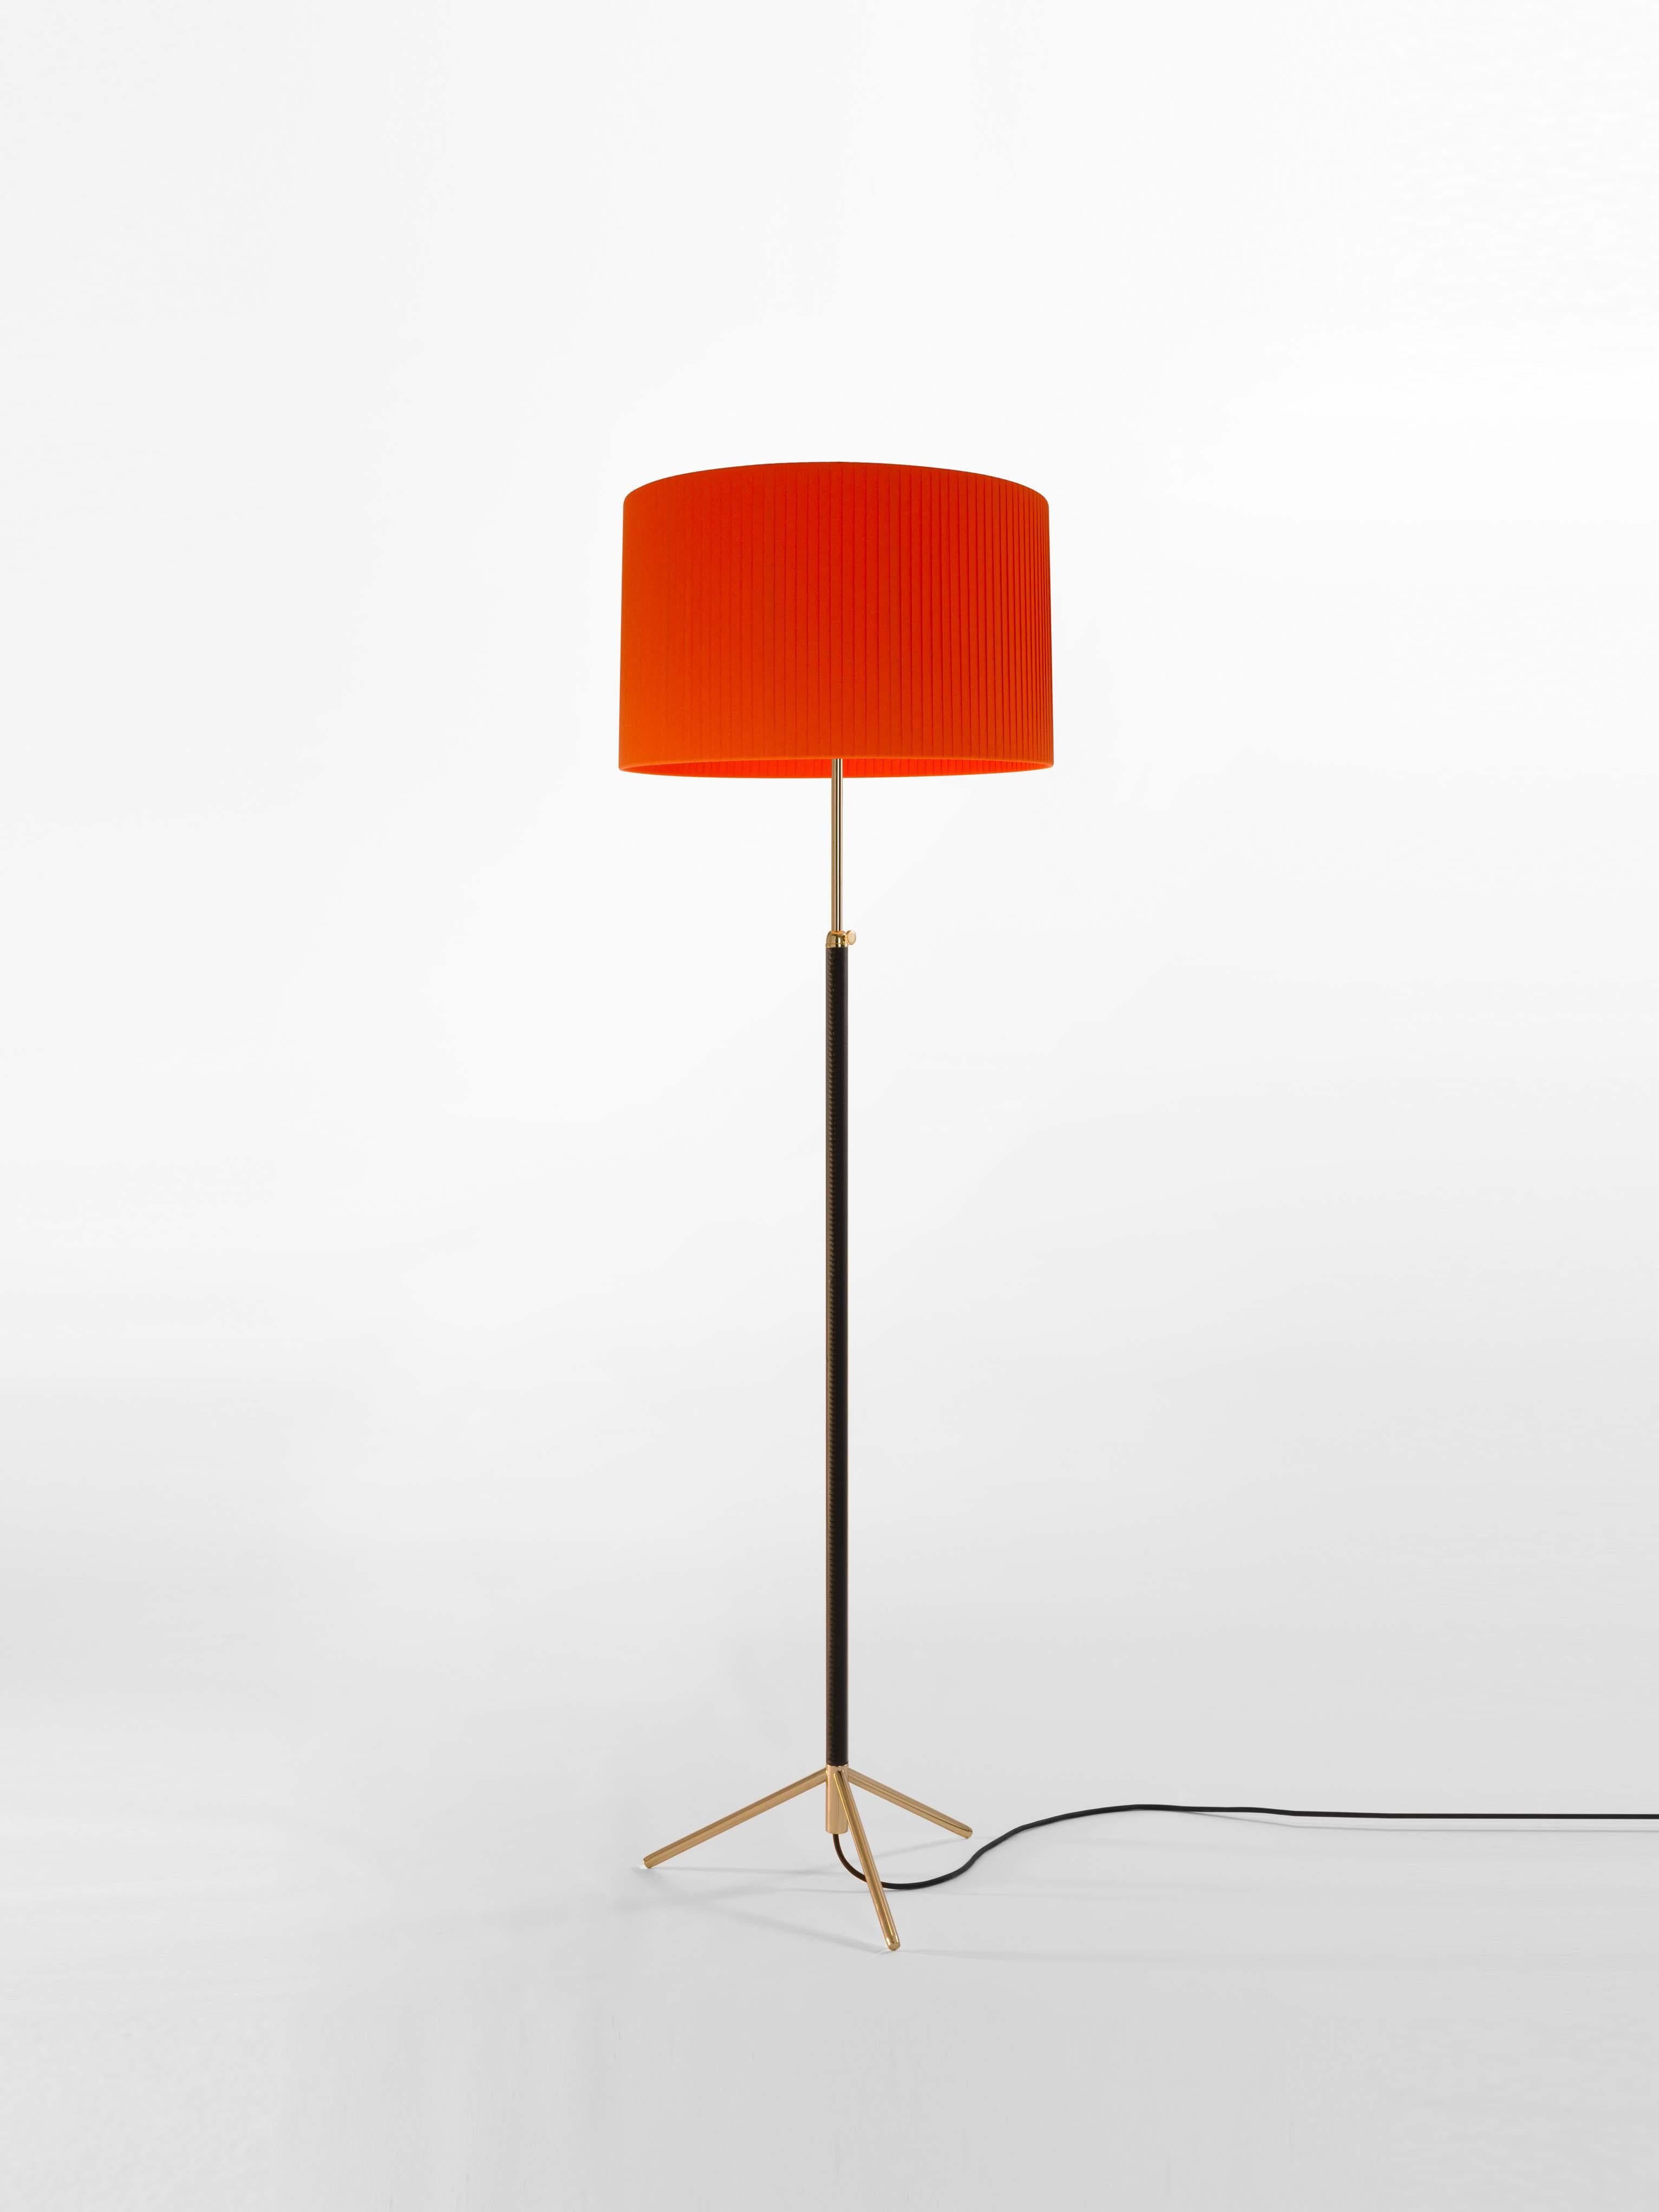 Red and brass Pie de Salón G2 floor lamp by Jaume Sans
Dimensions: D 45 x H 120-160 cm
Materials: Metal, leather, ribbon.
Available in chrome-plated or polished brass structure.
Available in other shade colors and sizes.

This slender